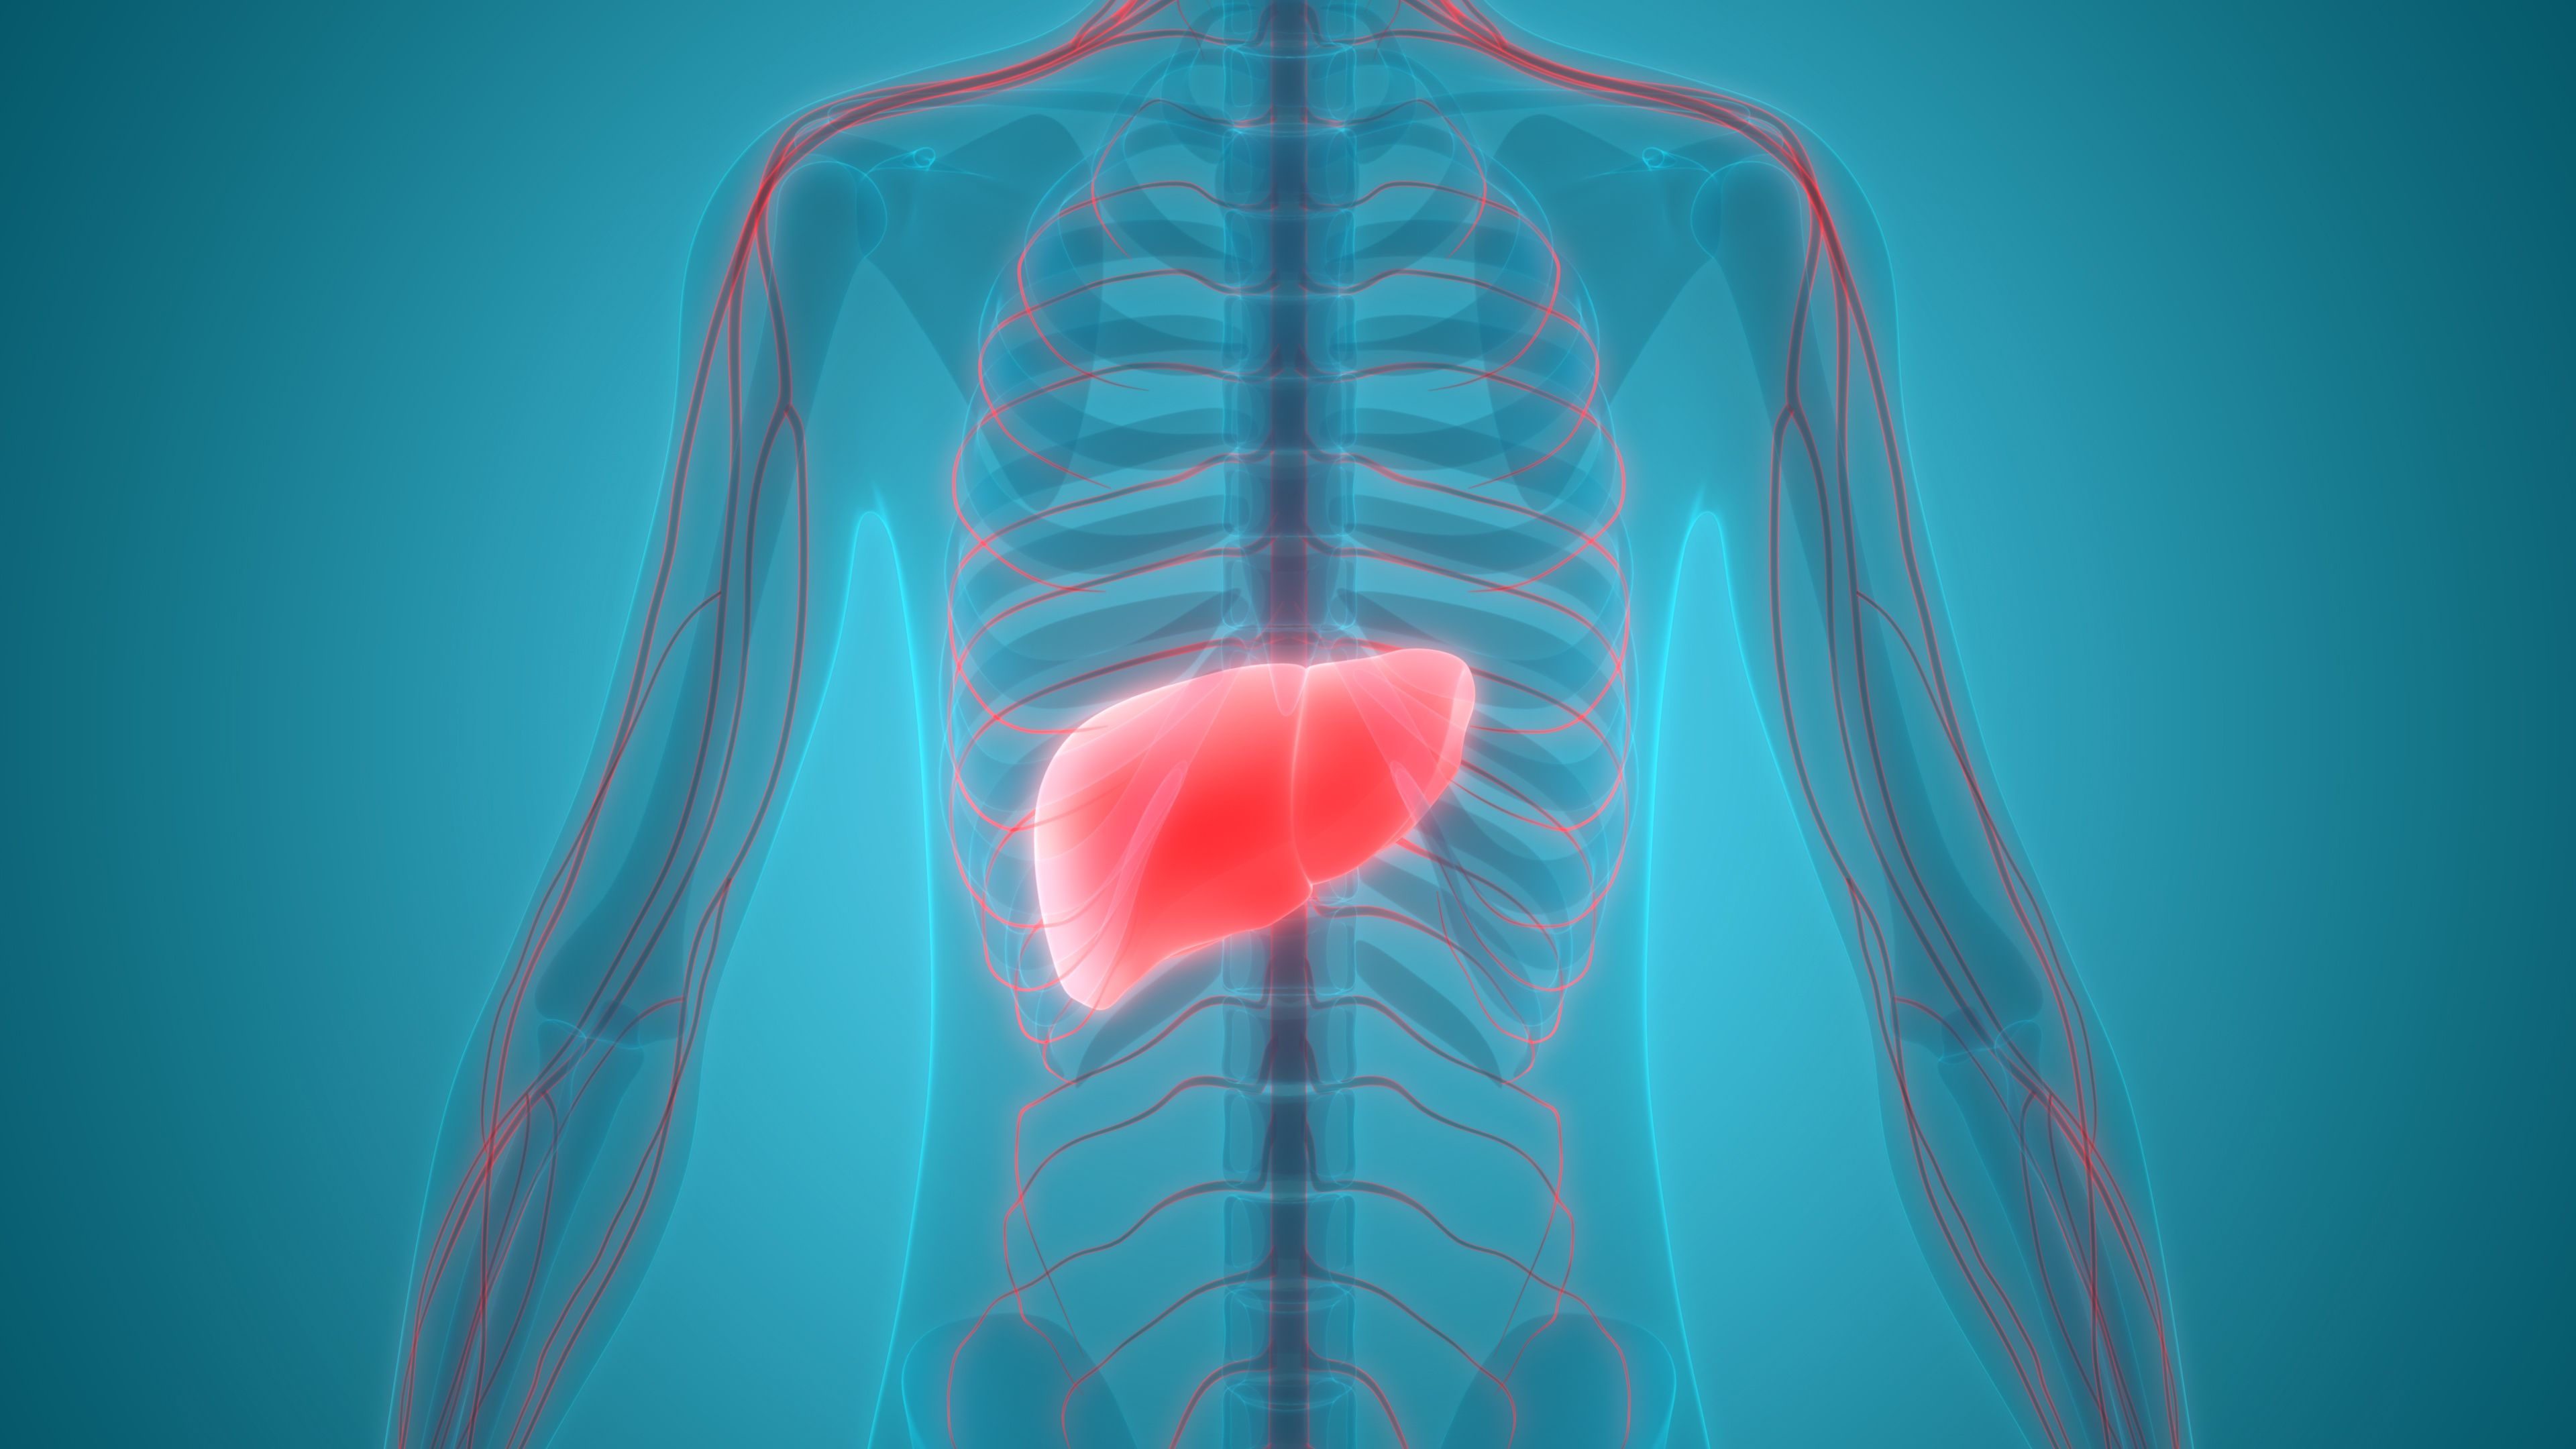 Postoperative TACE Prolongs RFS in Patients With Combined Hepatocellular-Cholangiocarcinoma